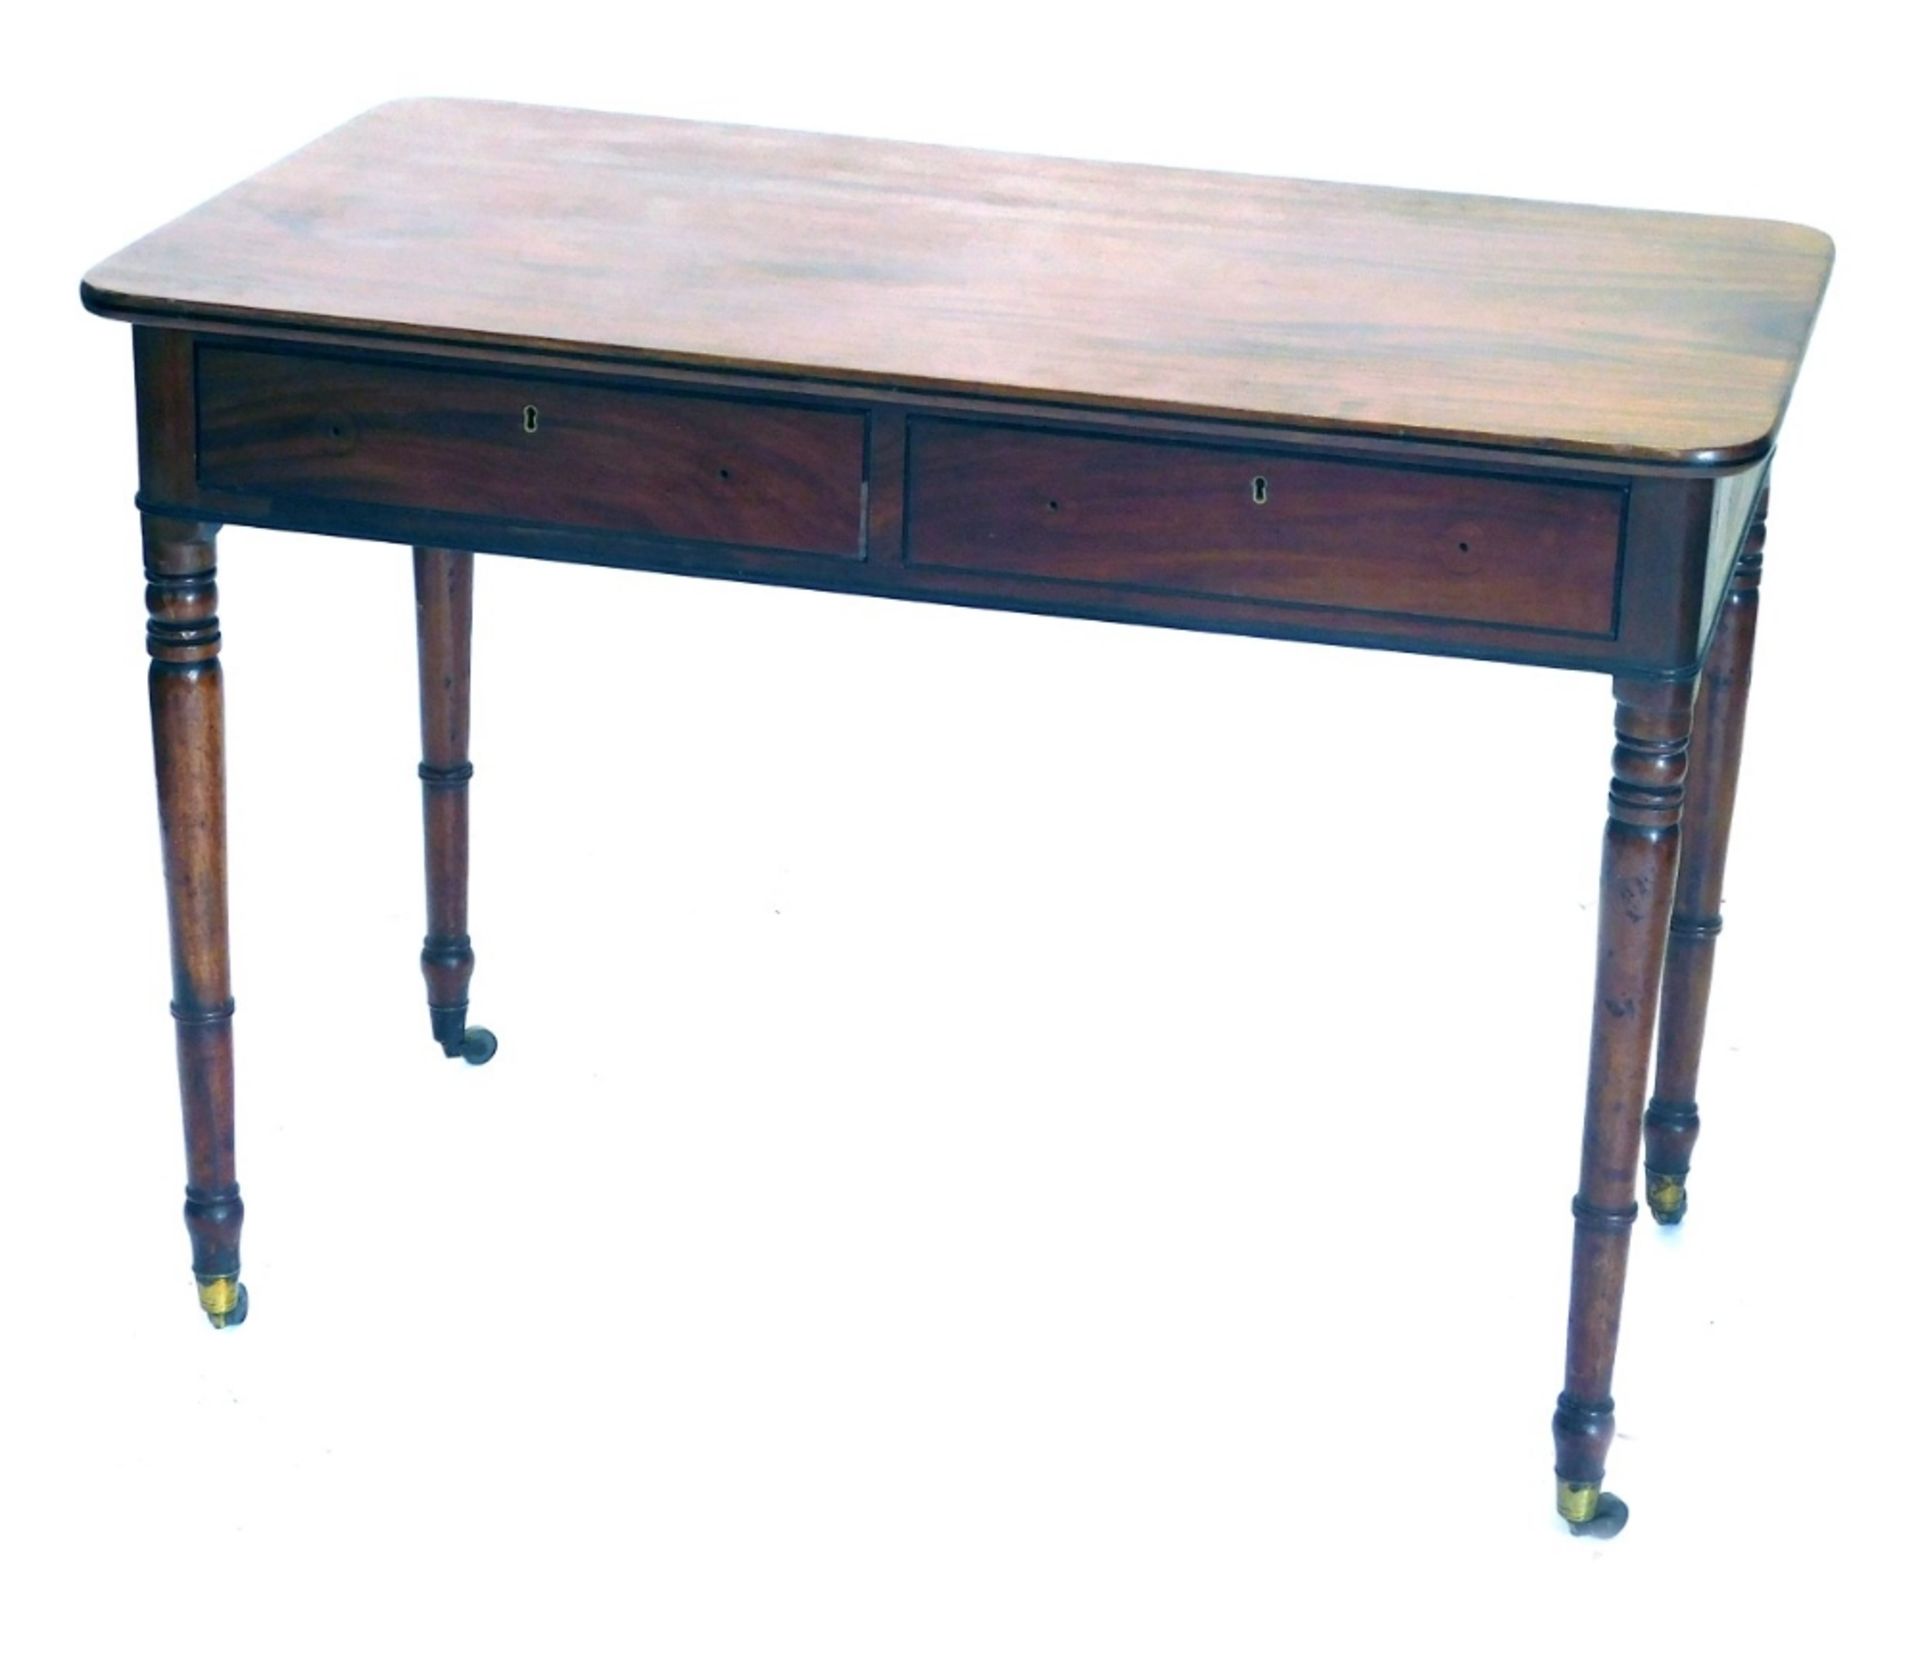 A George III mahogany side table, with rounded rectangular top, two frieze drawers, turned legs, and